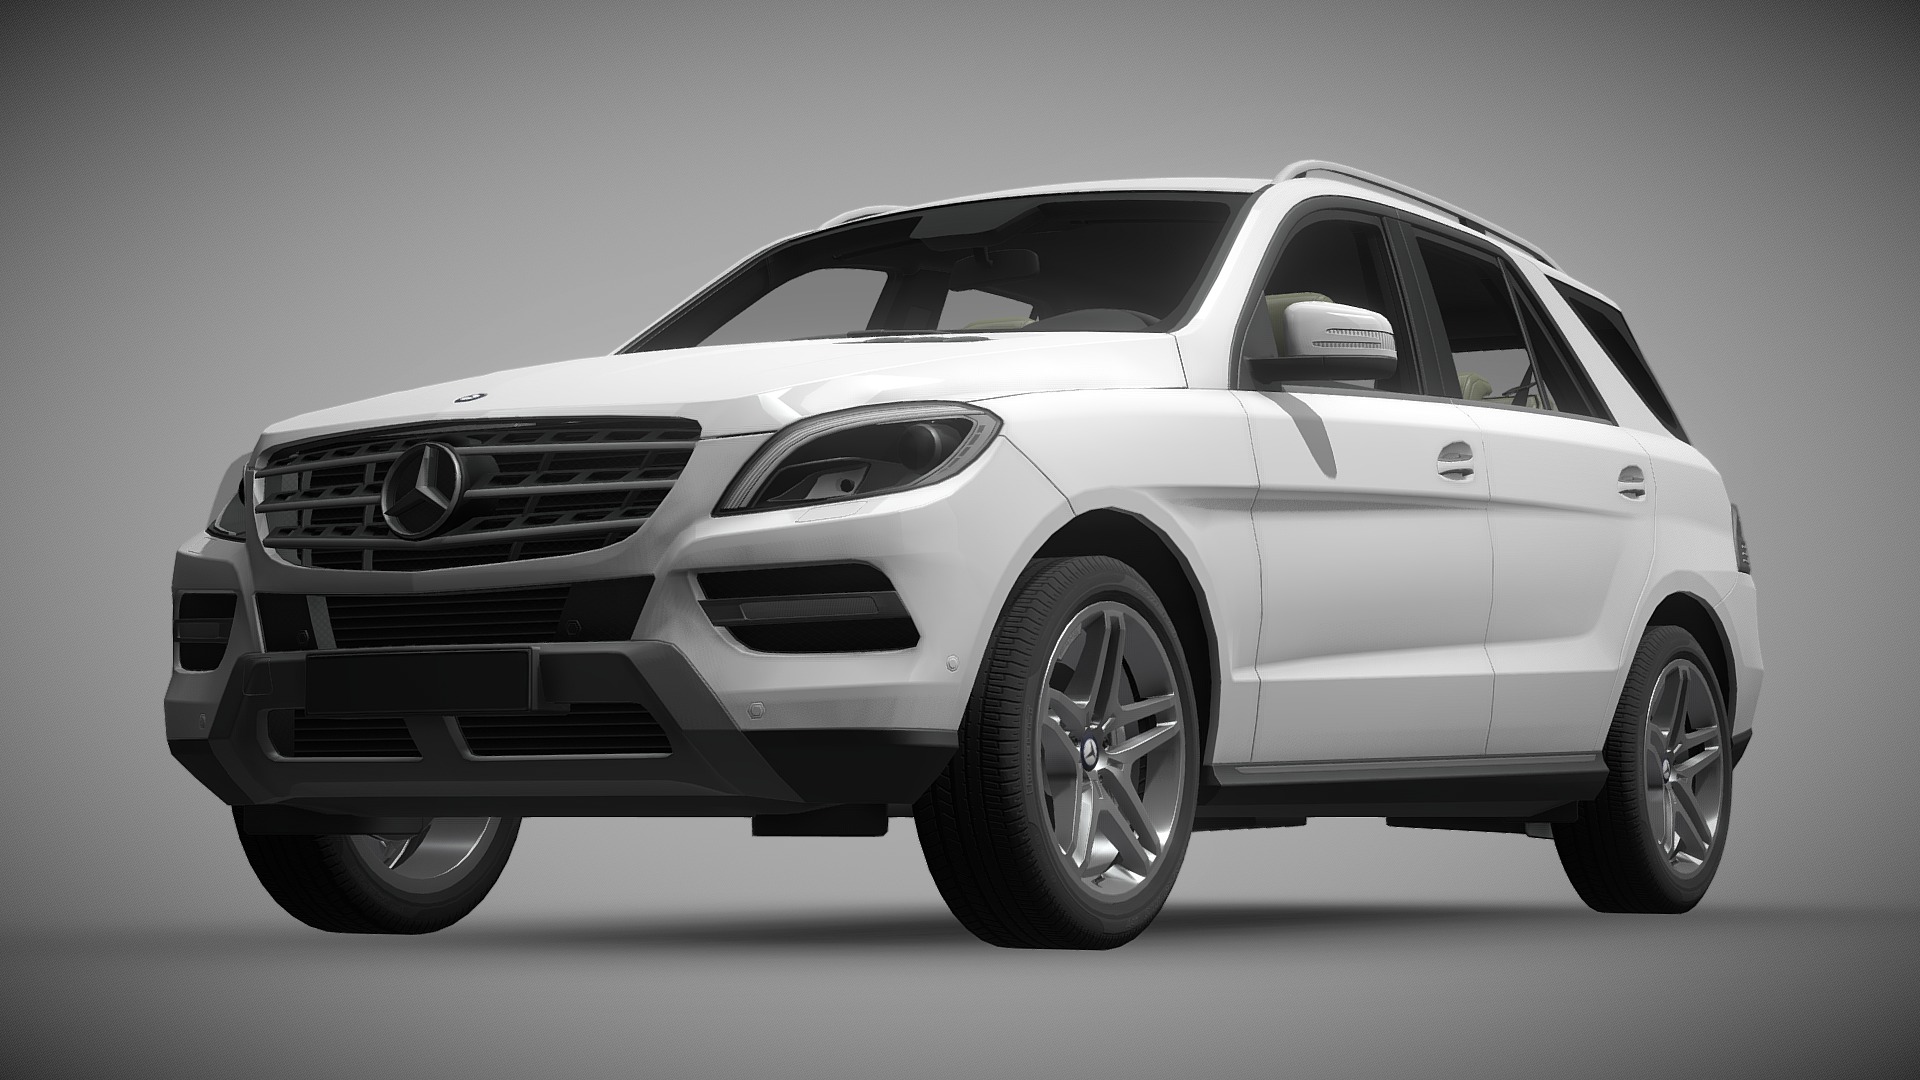 3D model Mercedes Benz Luxurycar SUV Model - This is a 3D model of the Mercedes Benz Luxurycar SUV Model. The 3D model is about a white car with a black background.